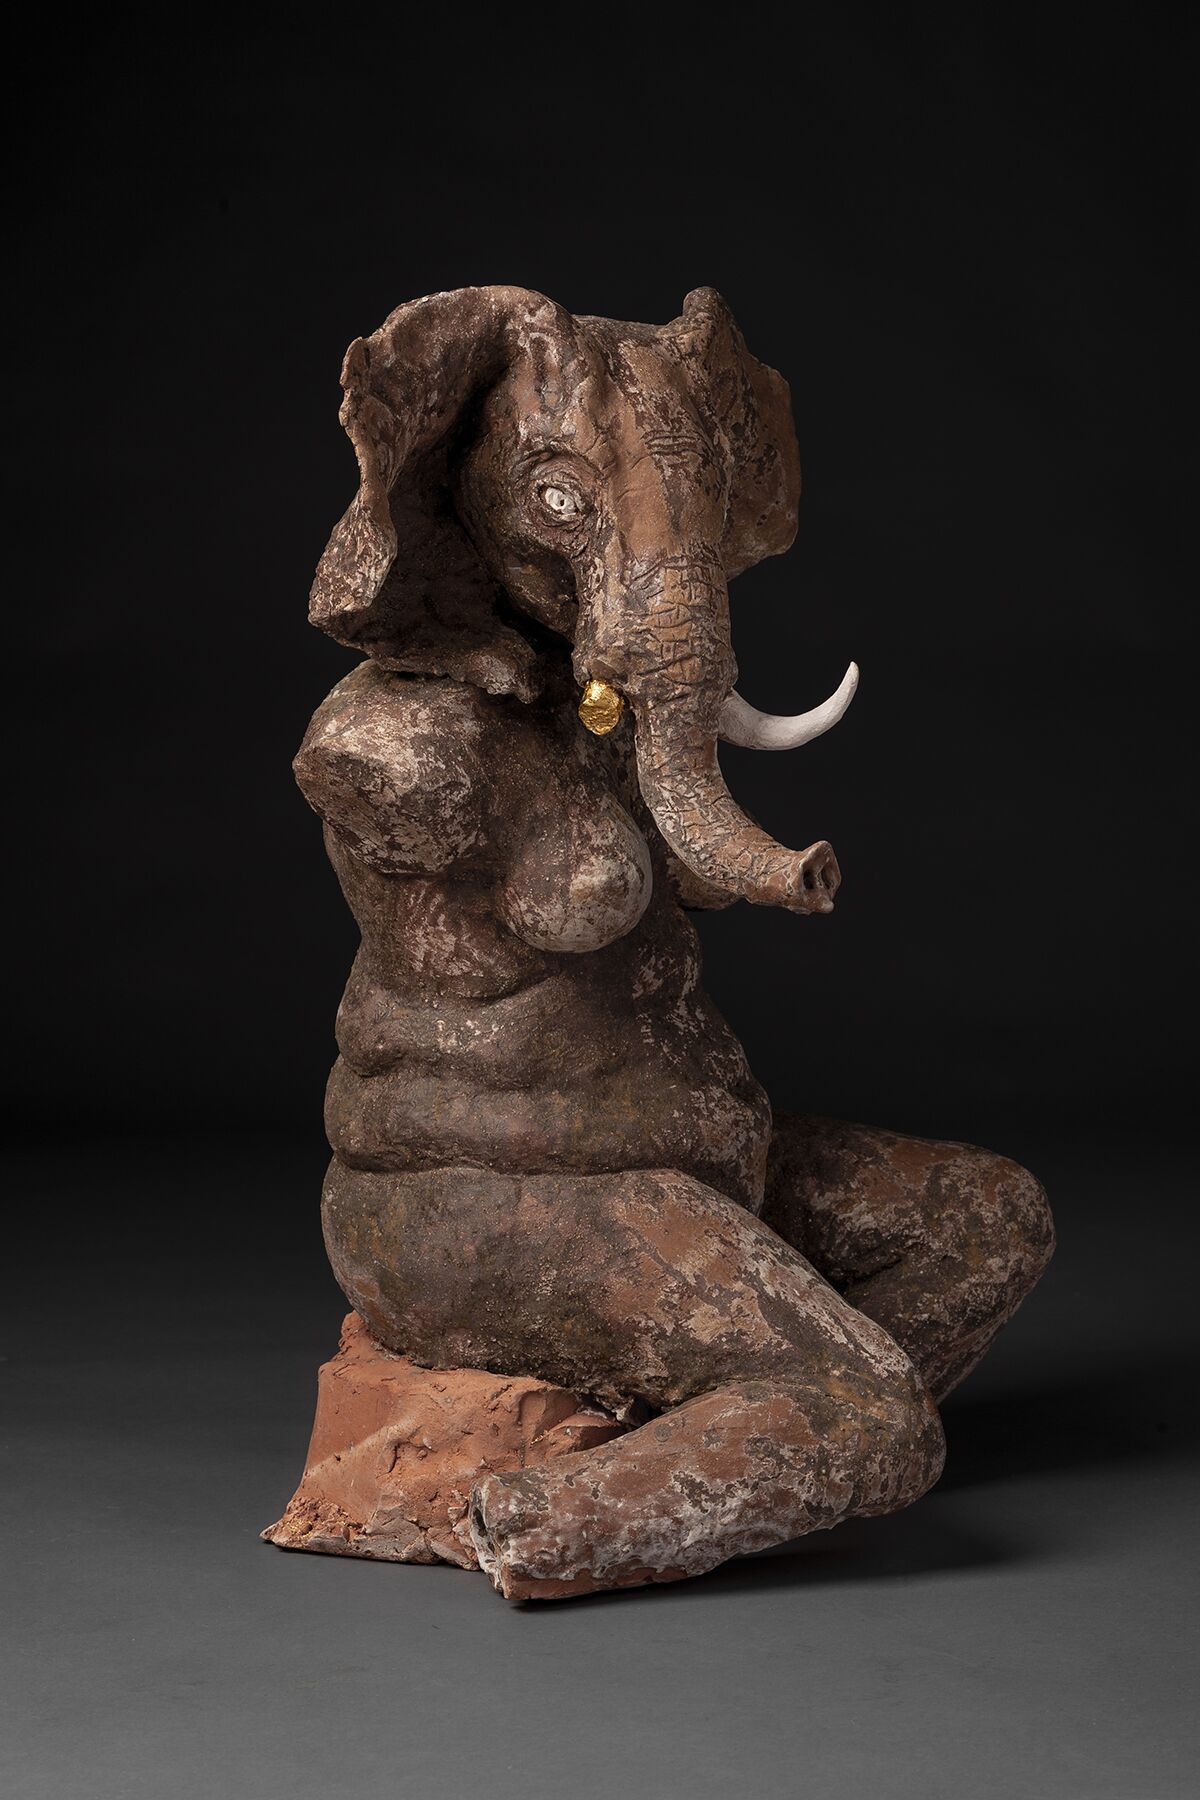 A sculpture of an elephant that represents a human-animal relationship.